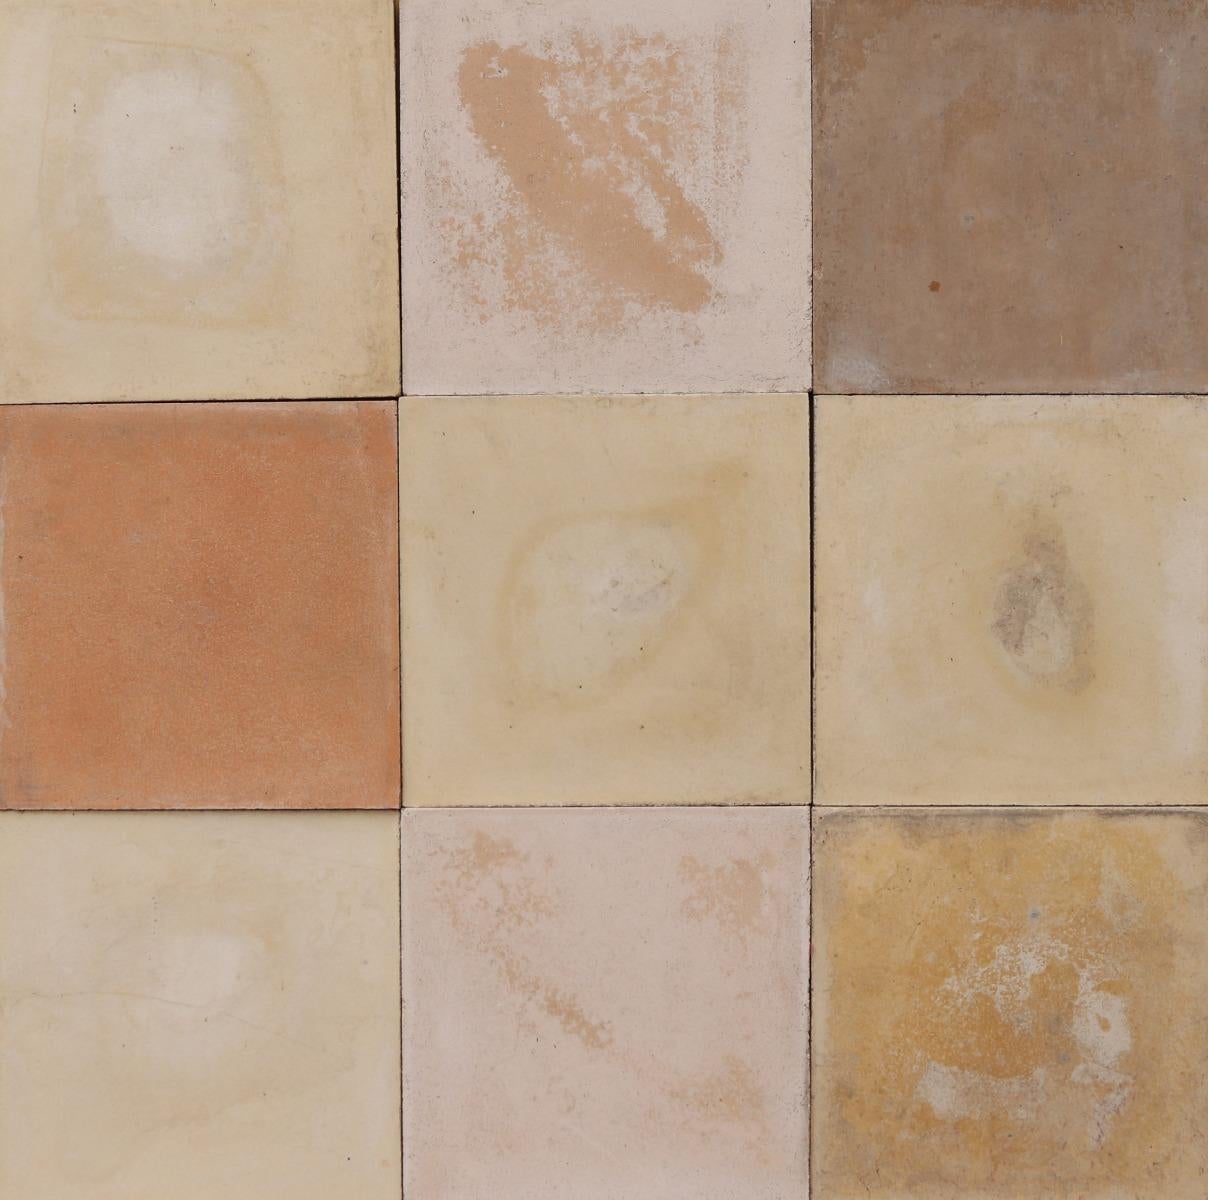 A batch of 342 reclaimed encaustic cement tiles suitable for use on floors or walls. These tiles will cover 13.6 m2 or 146 sq ft.

Mixed shades of cream, including some more orange and yellow.

Weathered surfaces and small chips associated with